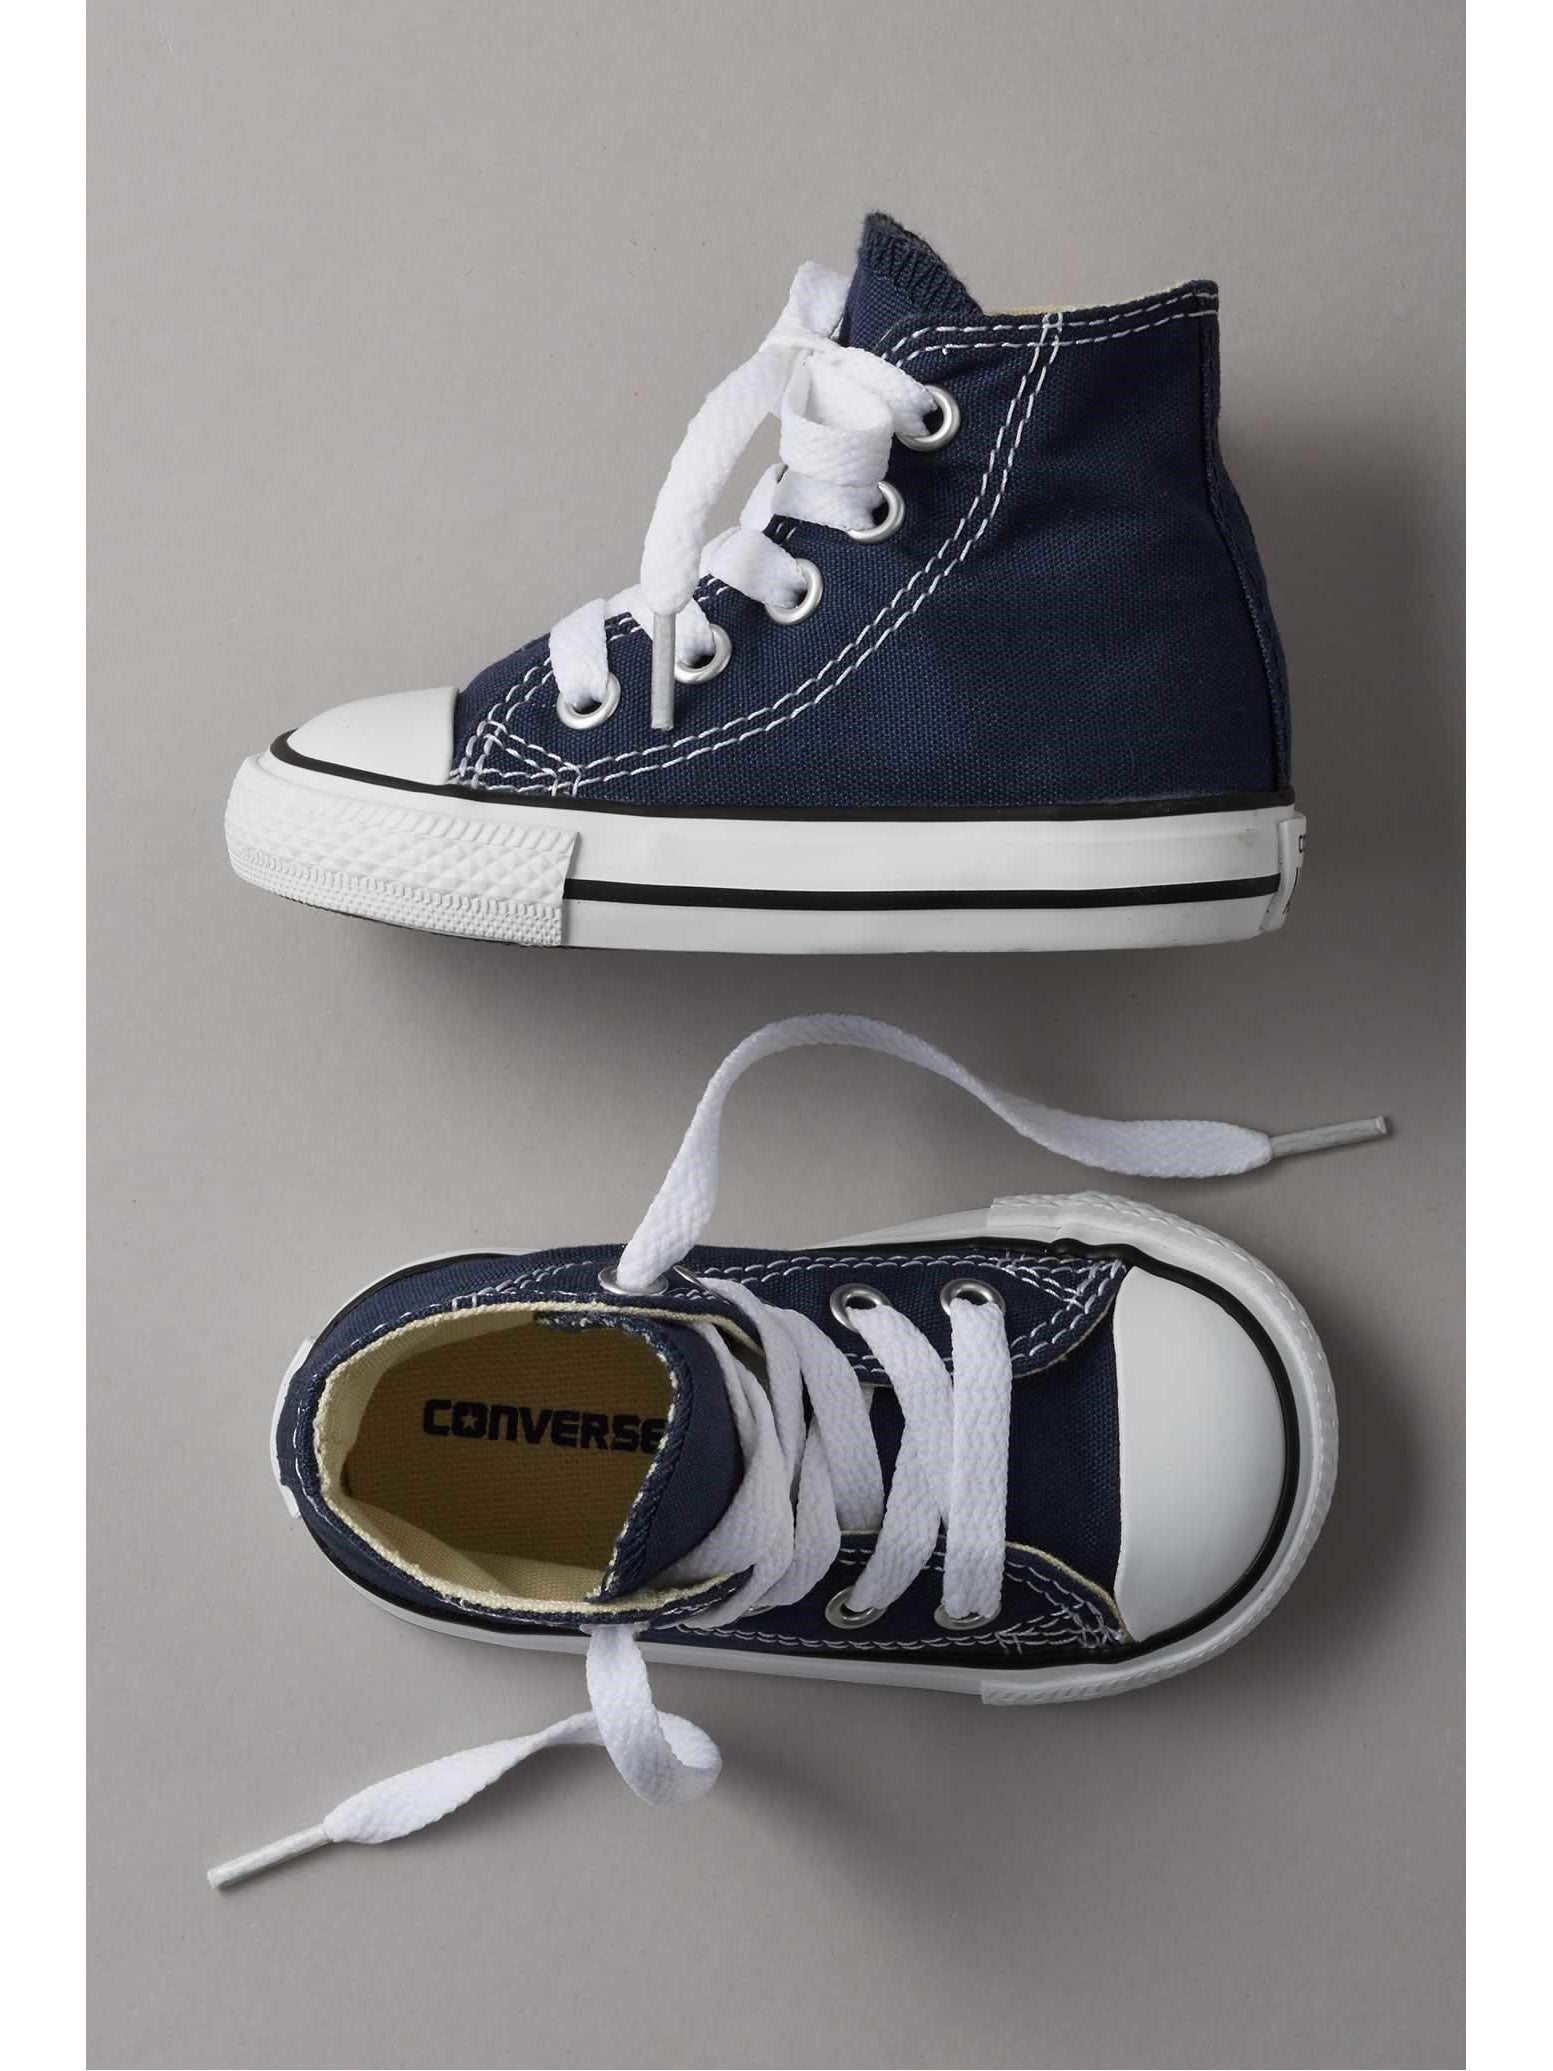 converse high tops for toddlers